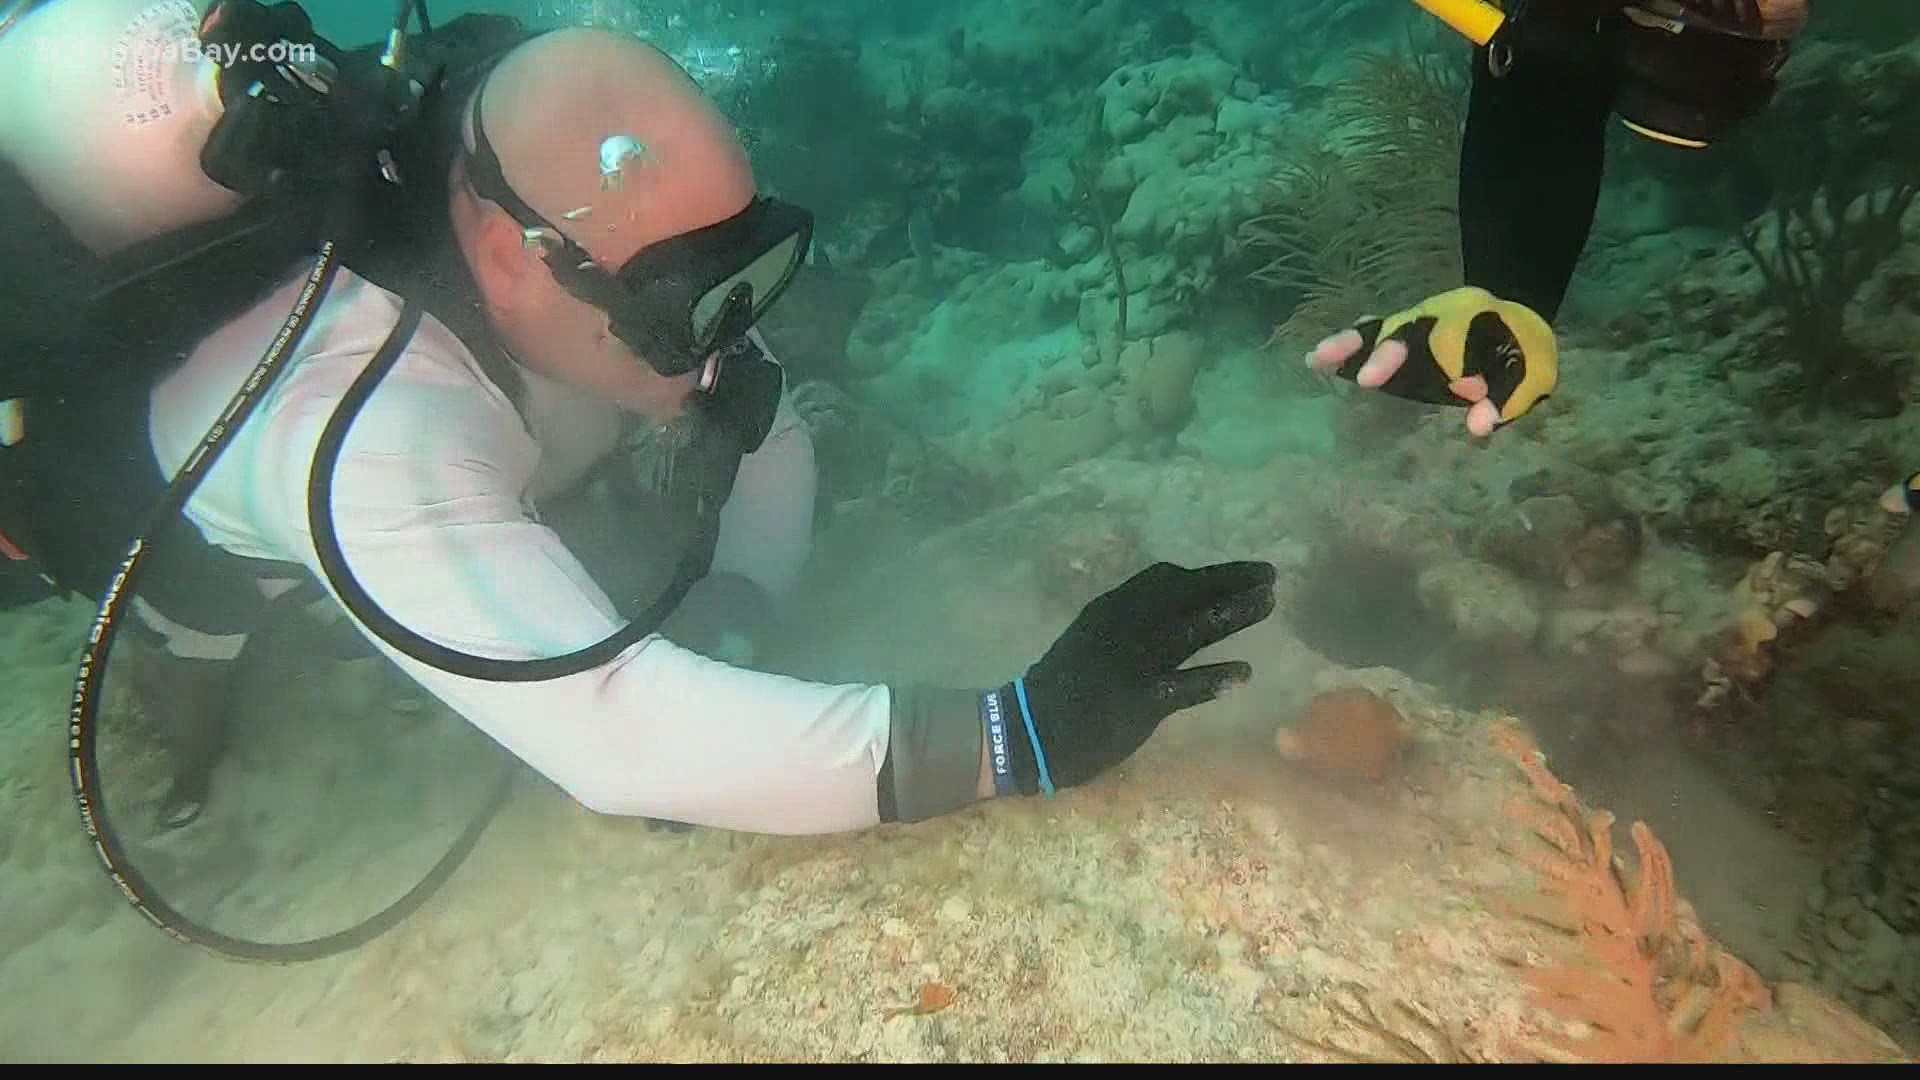 Tampa and Miami teamed up in order to help restore Florida's nearly extinct coral reefs.